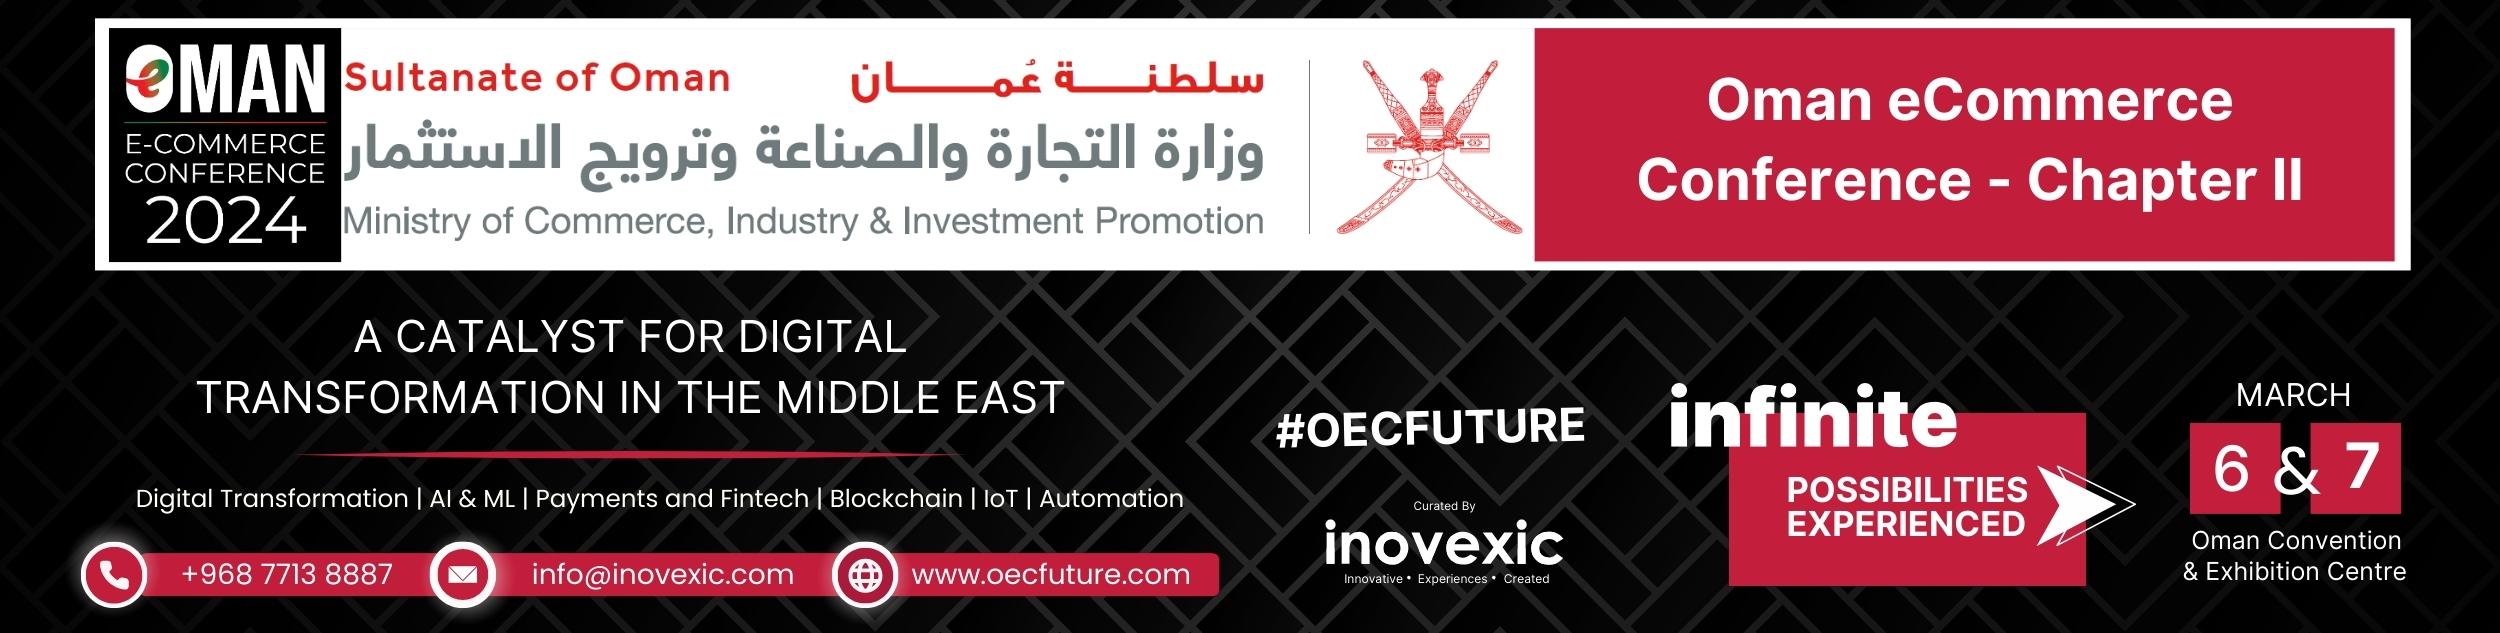 OMAN ECOMMERCE CONFERENCE CHAPTER 2 organized by inovexic